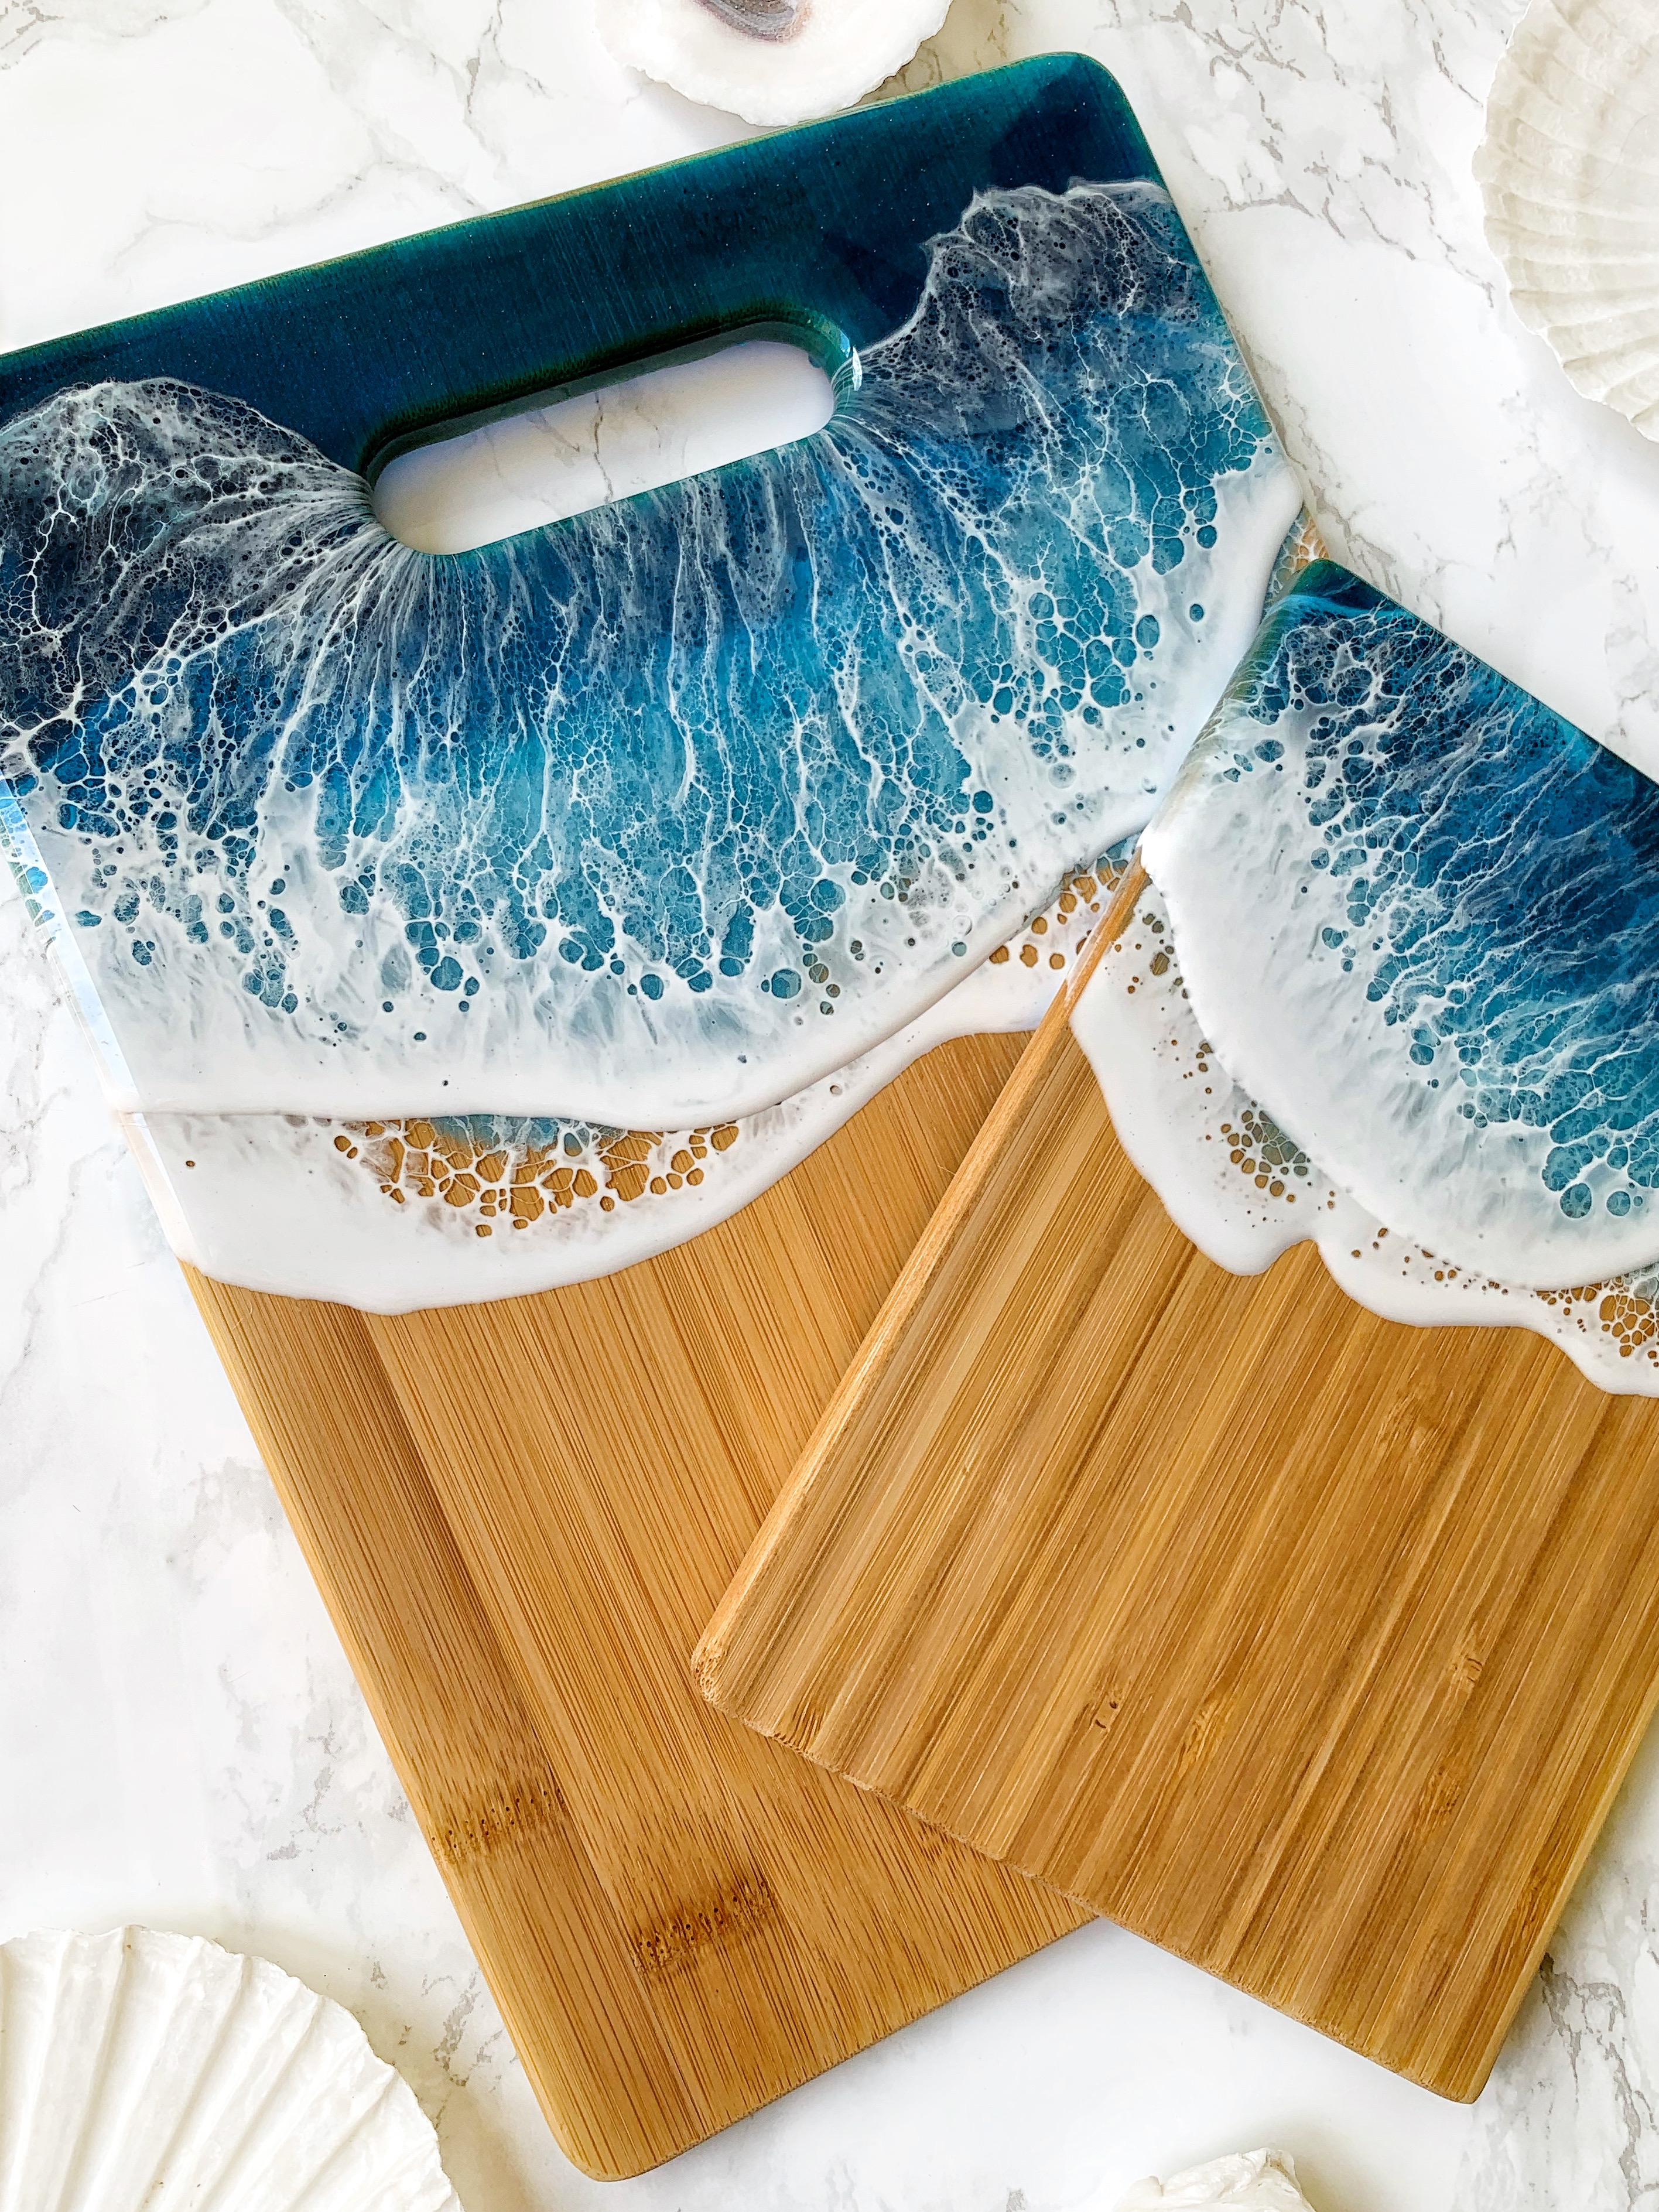 Salt + Shimmer Artistry serving boards crafted with designs made with resin that evoke a ripple of waves washing ashore.